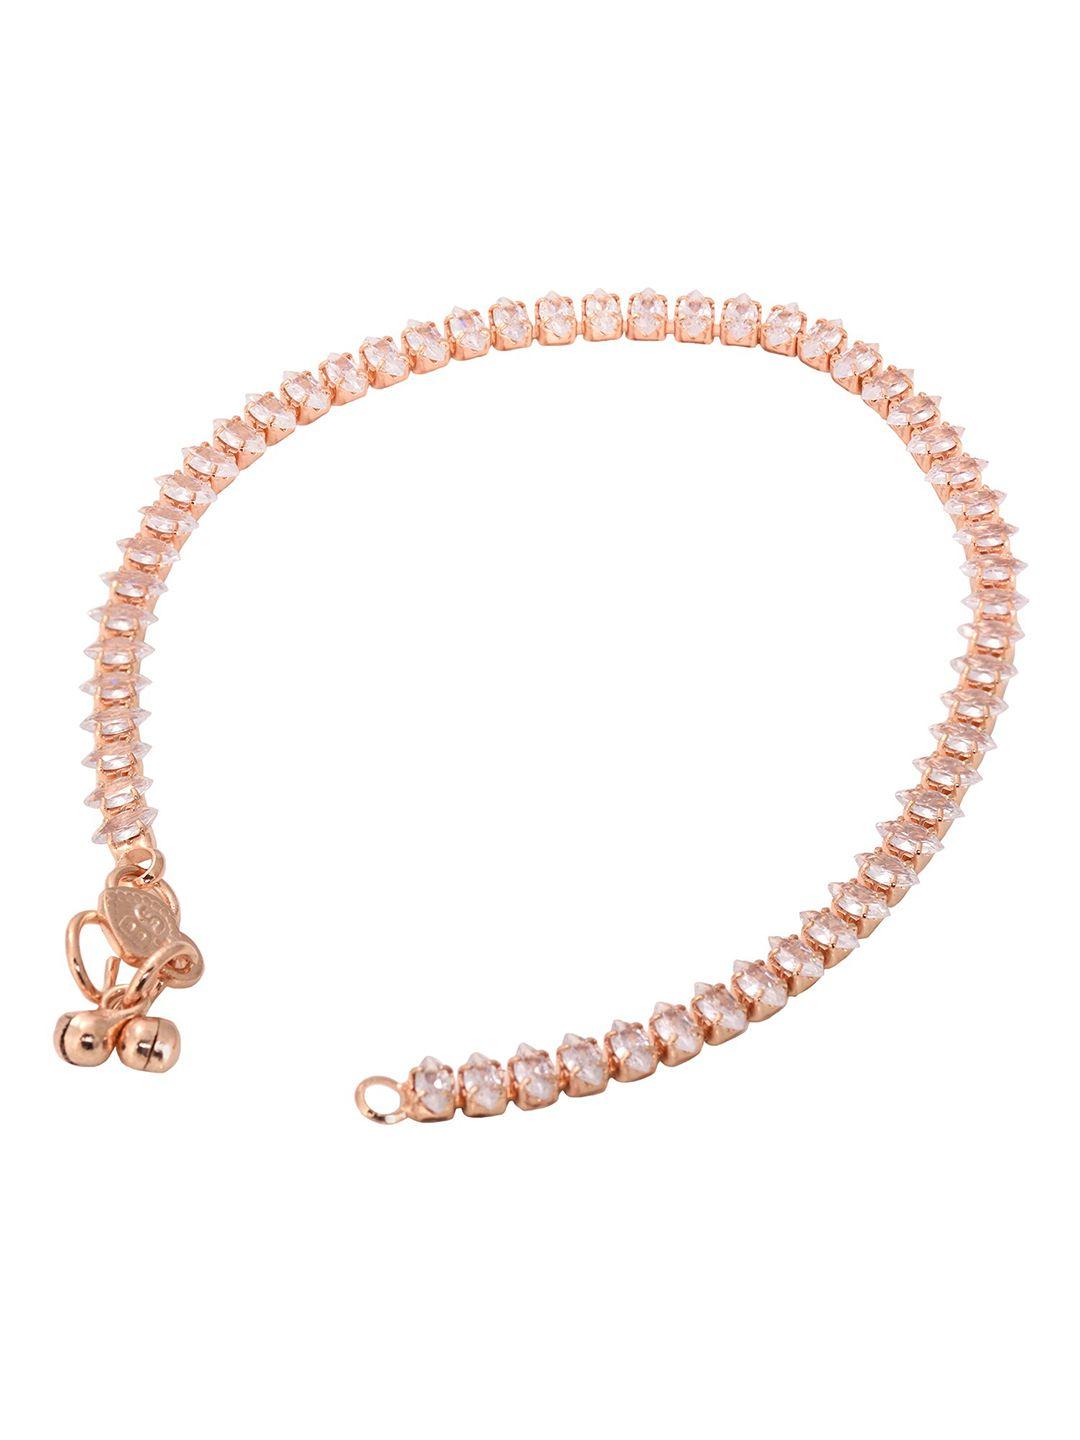 saraf rs jewellery set of 2 rose gold-plated white ad-studded anklets